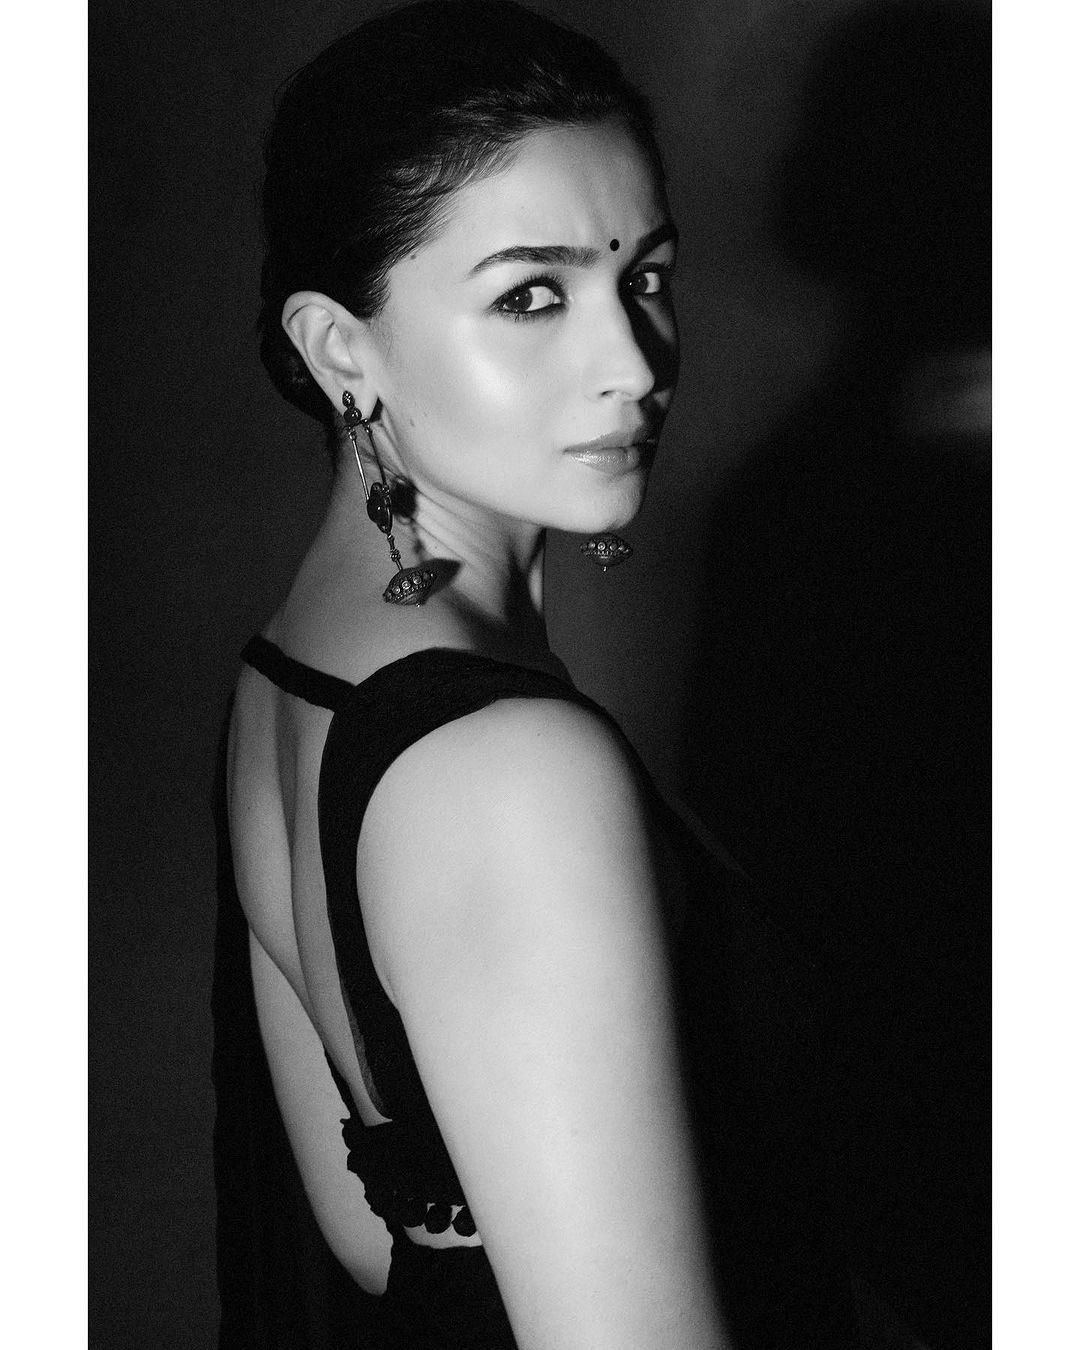 Eyes That Speak: Alia's black and white saree collection features her expressive kajal eyes and a beautiful bindi.